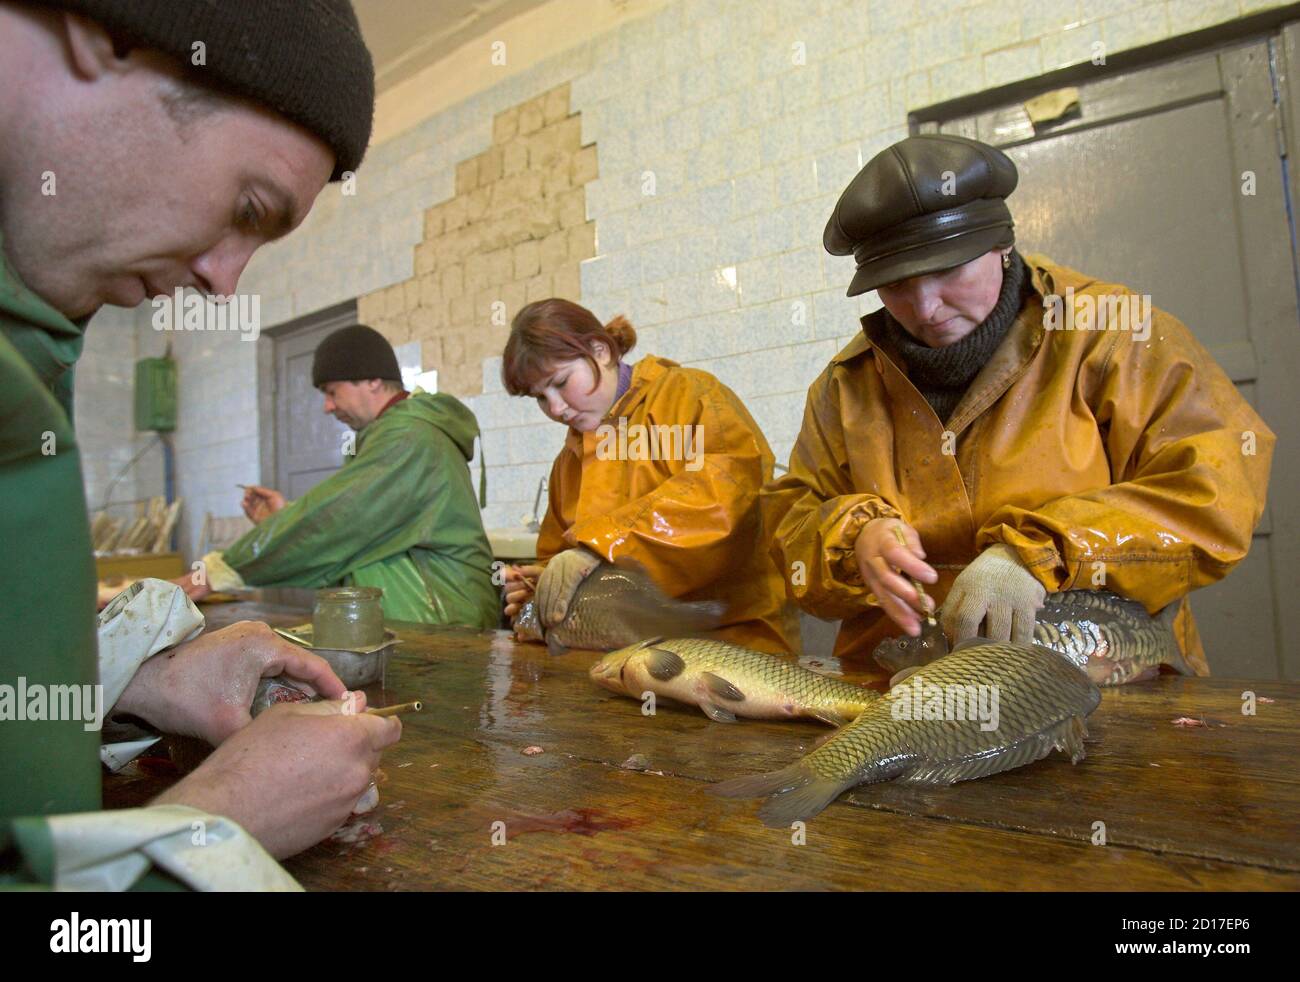 Workers remove hypophysis glands from carps in a state fish farm in the village of Aziorny, some 50 km (31 miles) east of Minsk, March 13, 2007. The gland is used to stimulate the excretion of a hormone, which when injected into other carps speeds up spawning independent of weather conditions.    REUTERS/Vasily Fedosenko (BELARUS) Stock Photo